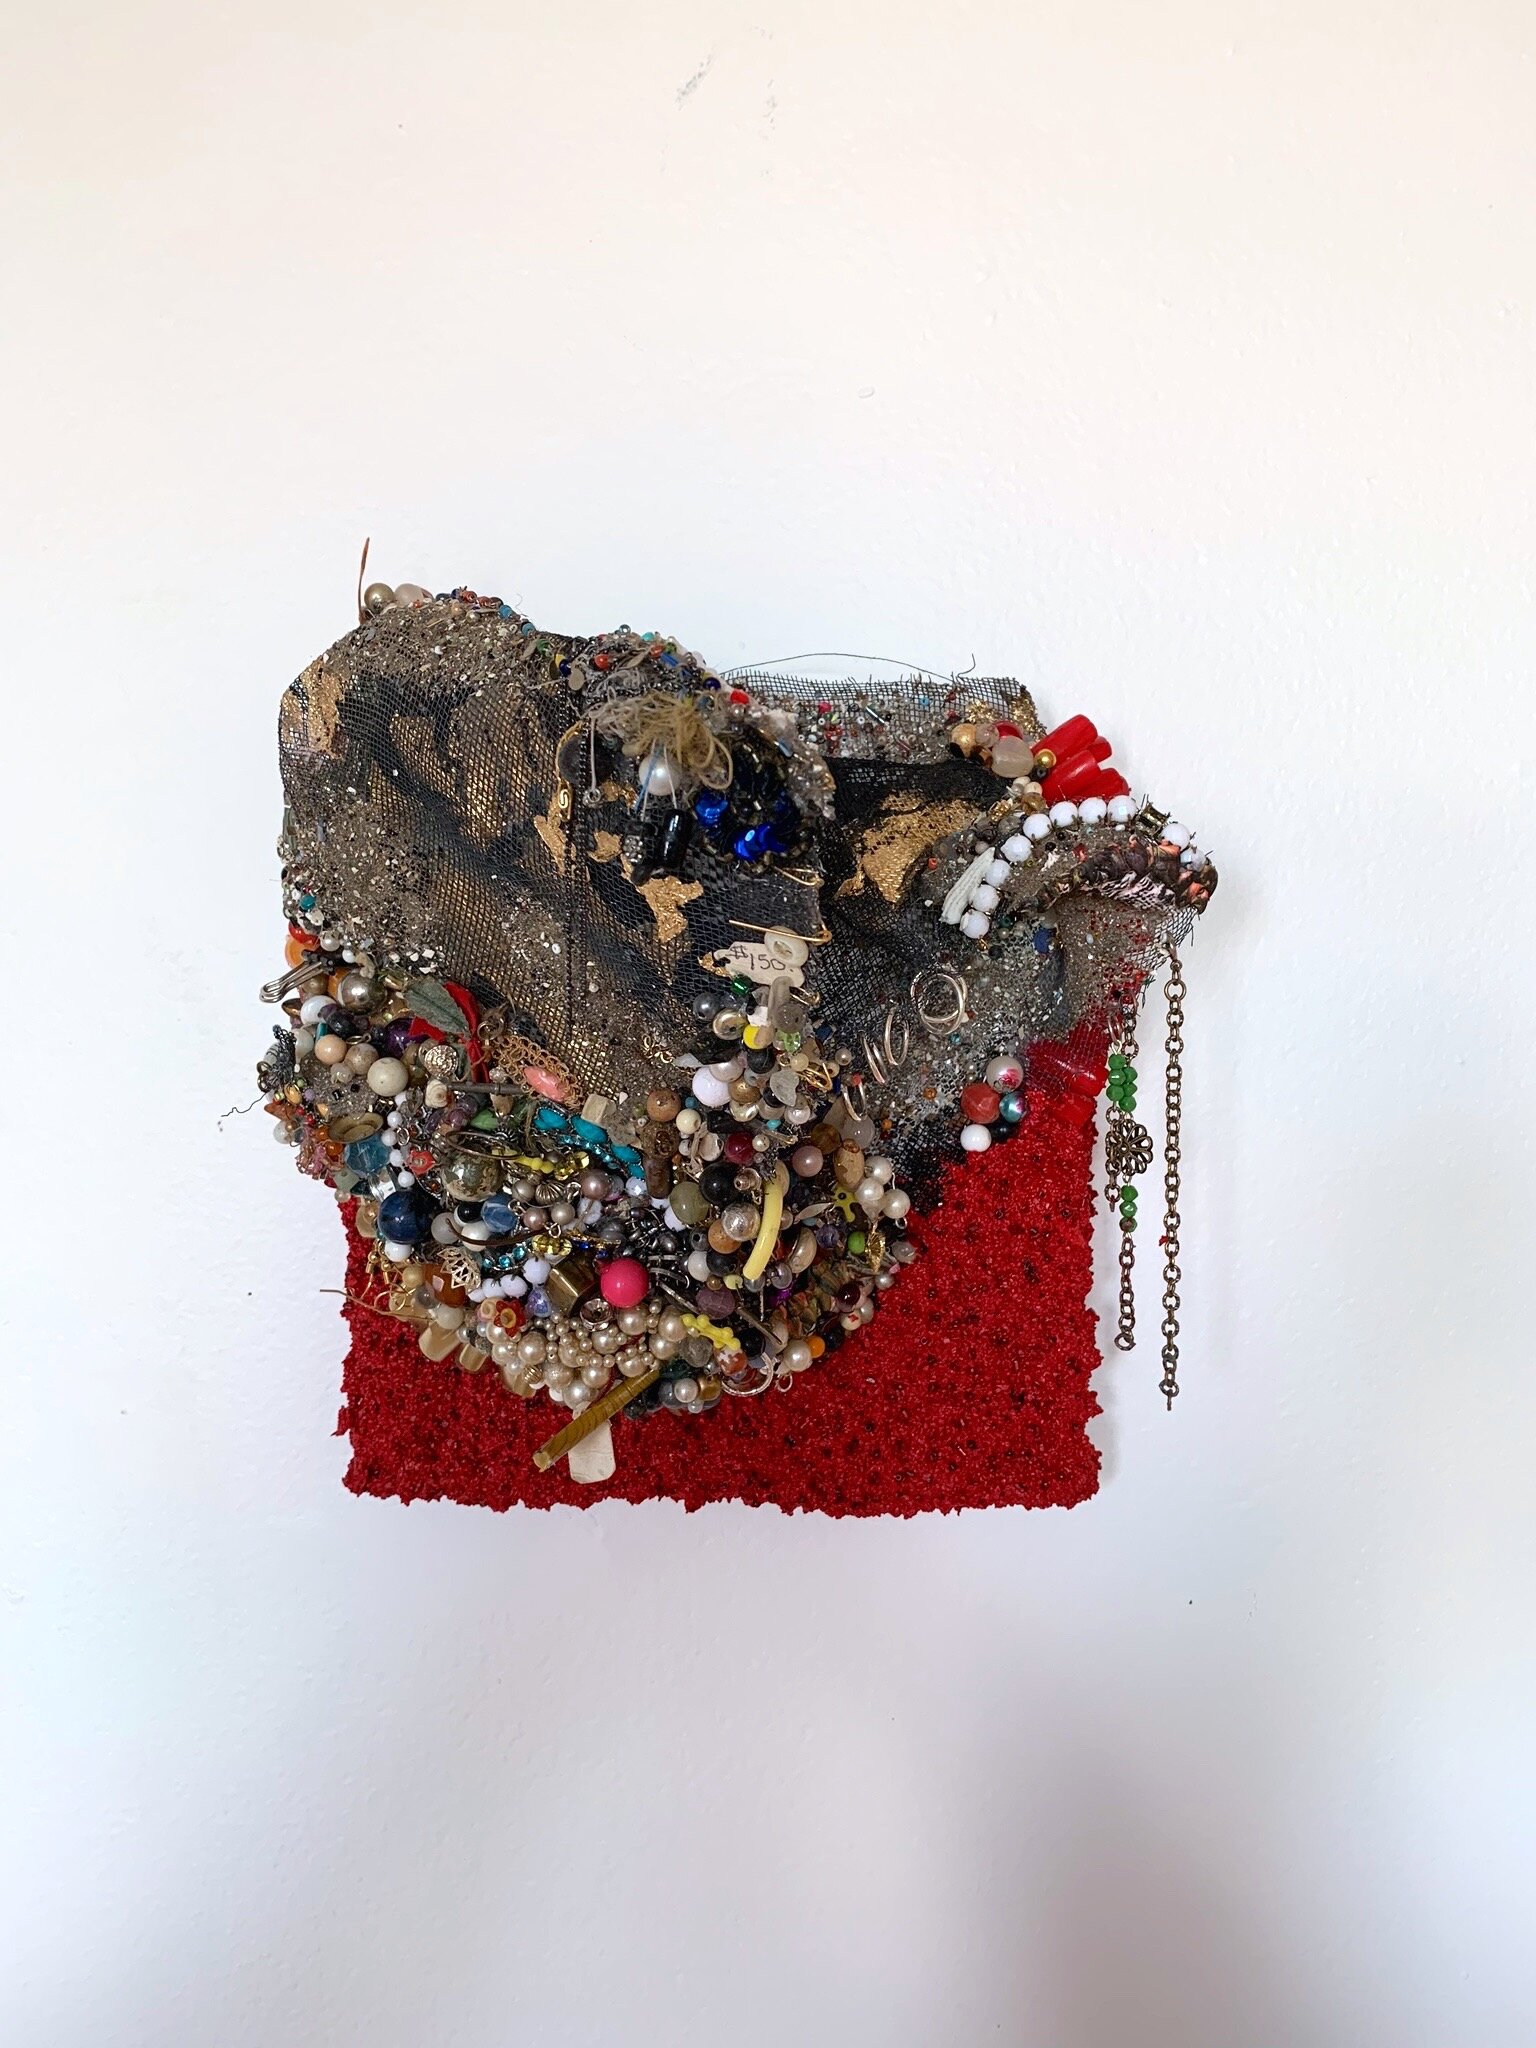   Filed Down,  2019, costume jewelry, found objects, metal screen, fake nails resin, and pumice medium on panel, 8x8” 